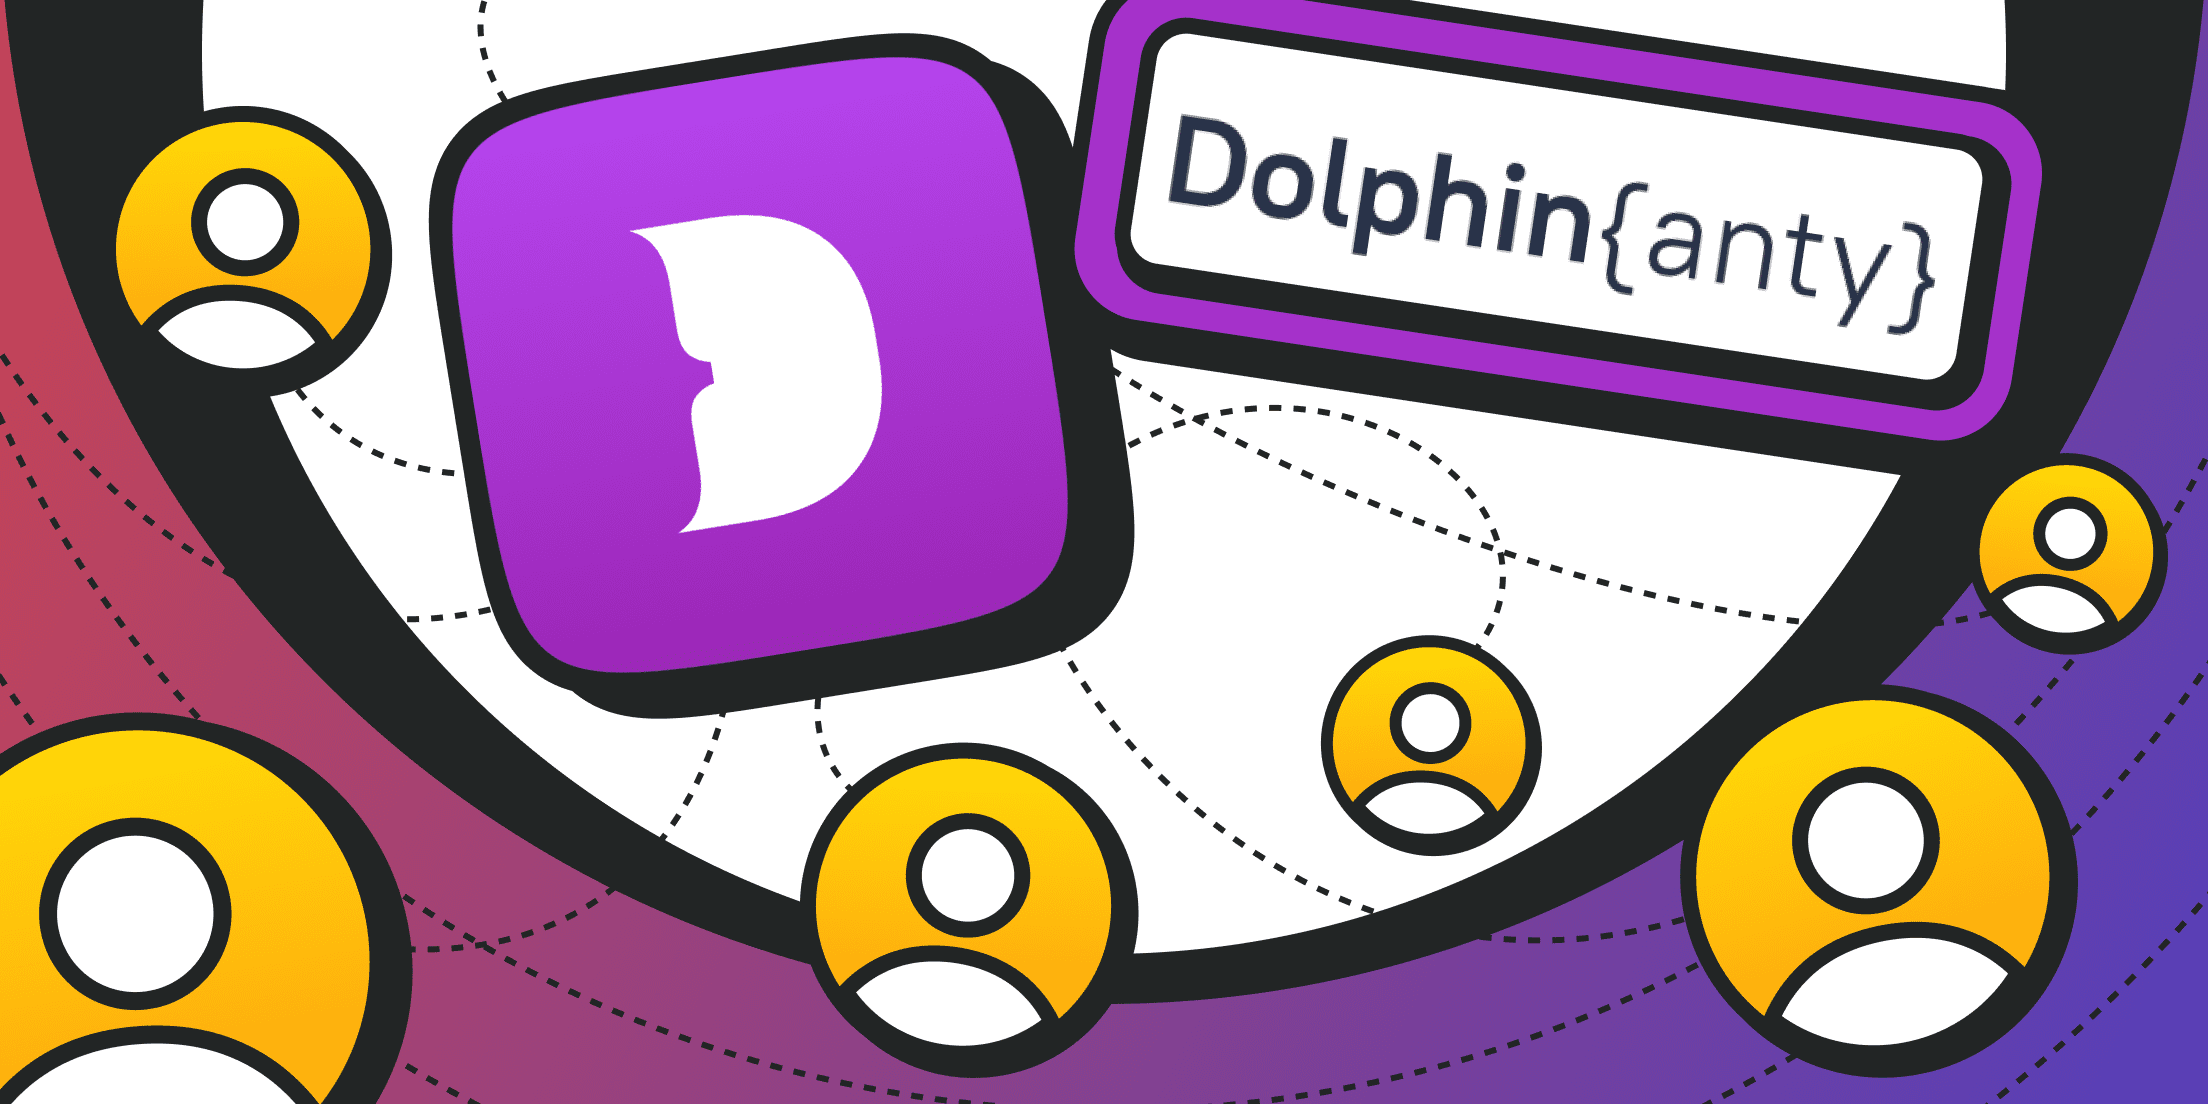 Dolphin{anty} Anti-detect Browser, or How to Work with Multi-accounting